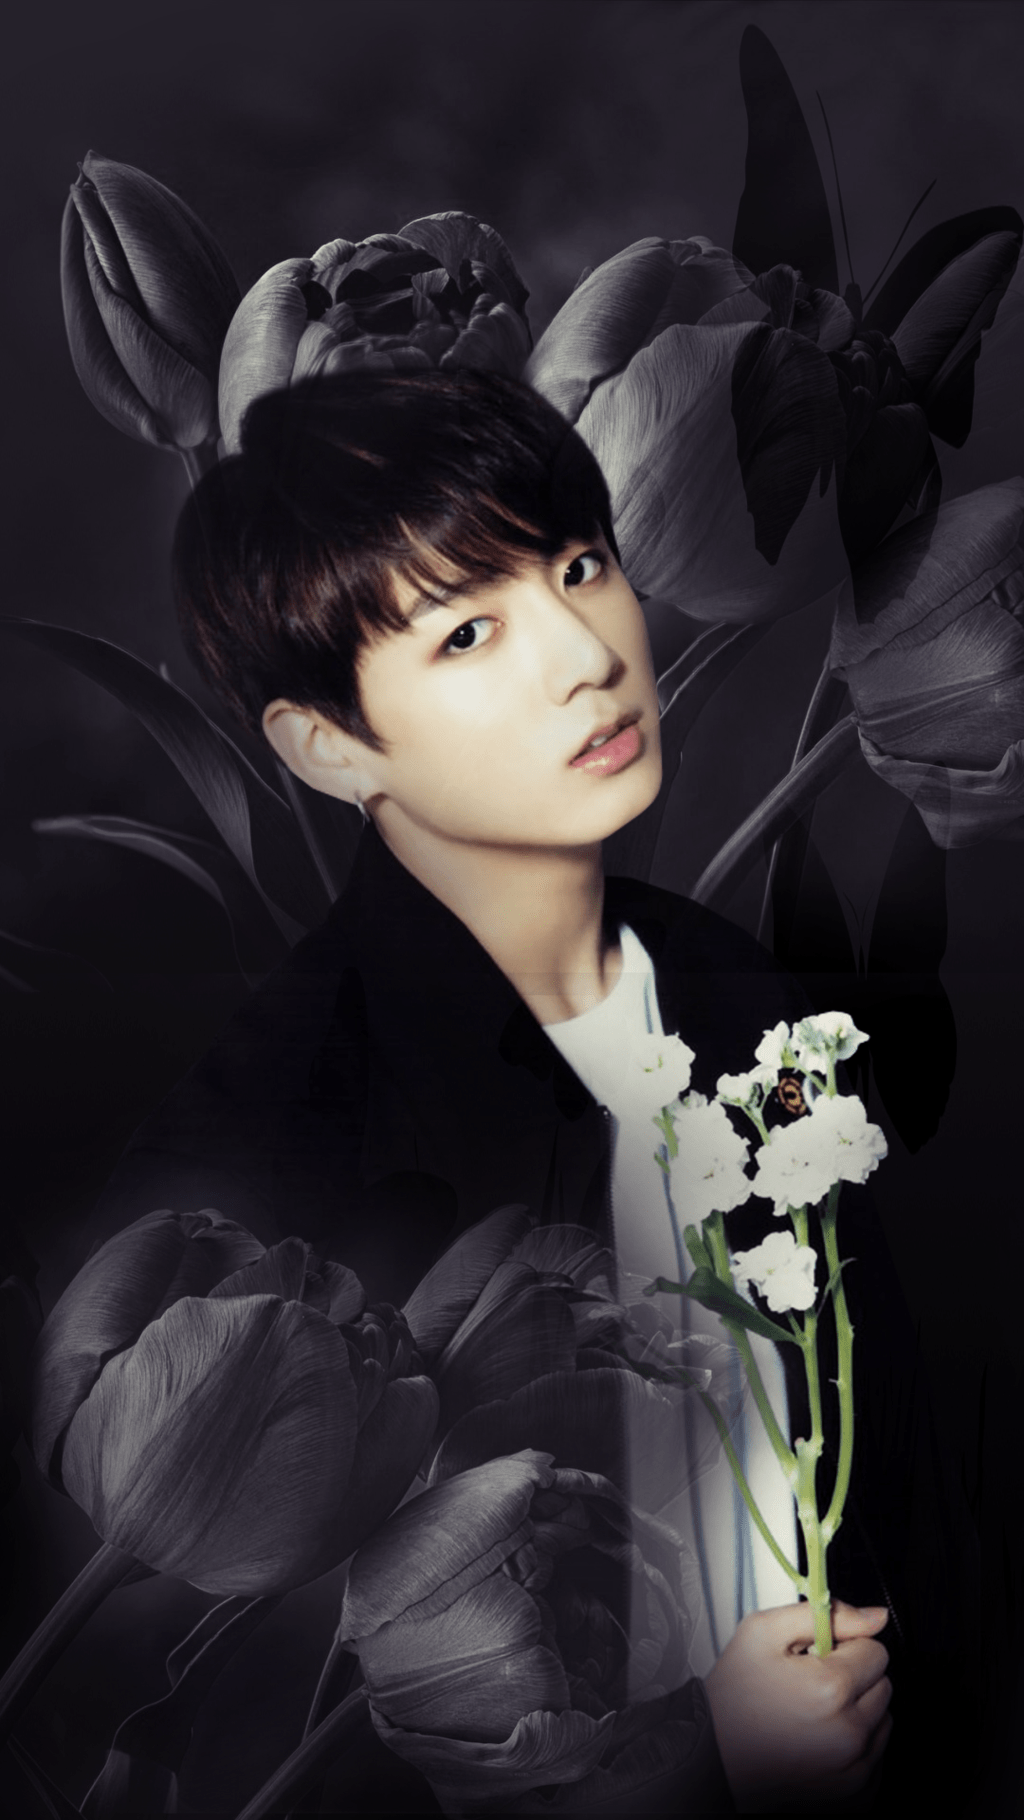 Jungkook Wallpaper Cute For iPhone, Android and Desktop!